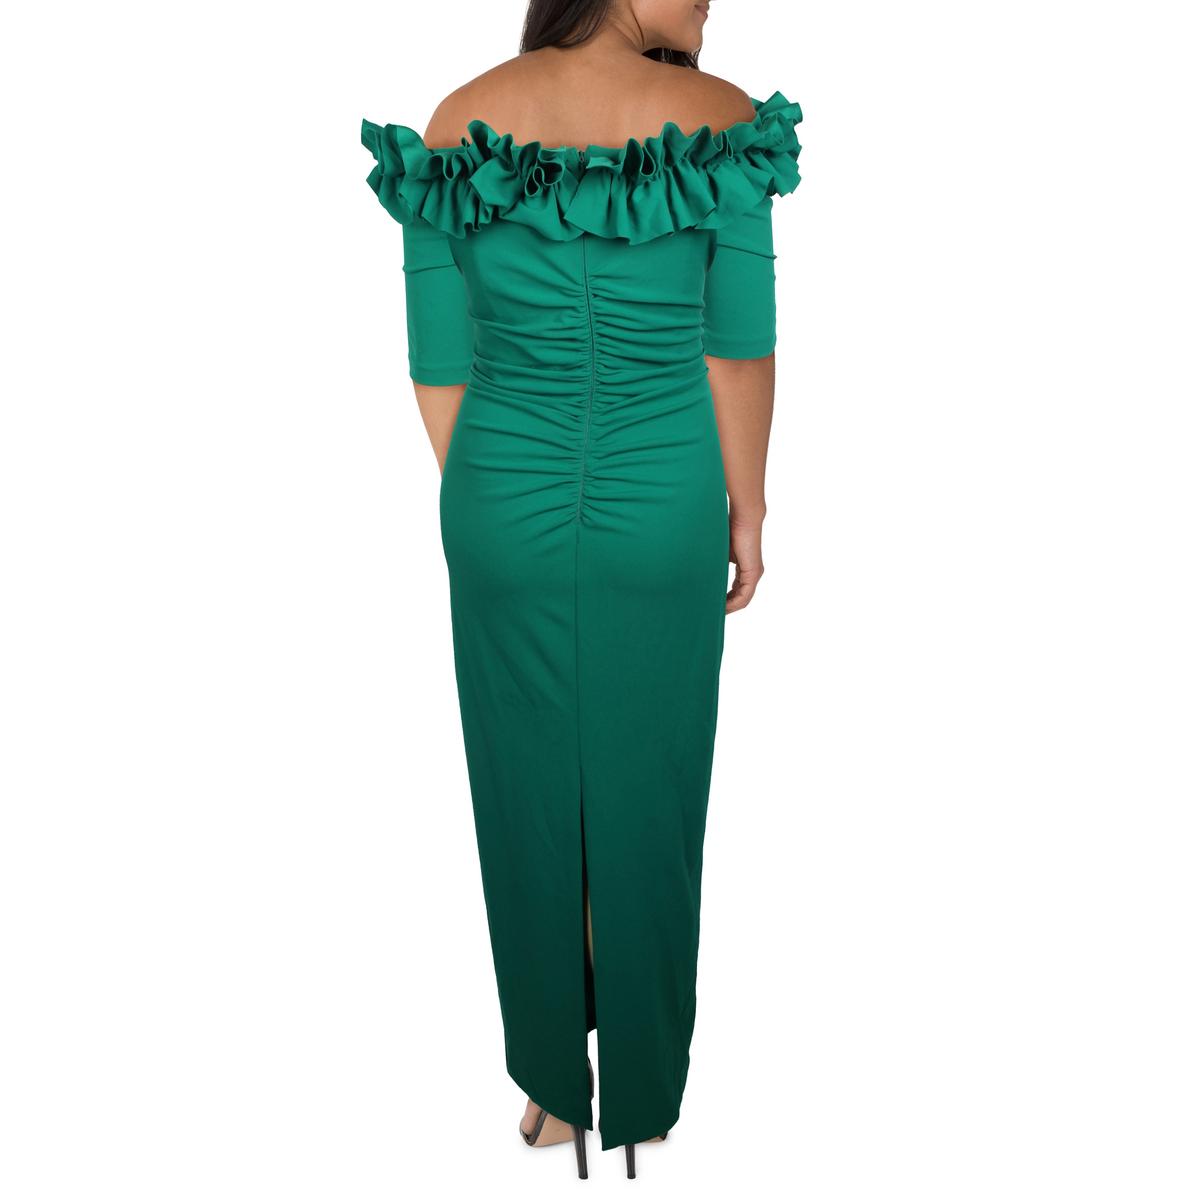 Xscape Womens Ruffled Embellished Formal Maxi Dress Gown Plus BHFO 0348 -  International Society of Hypertension